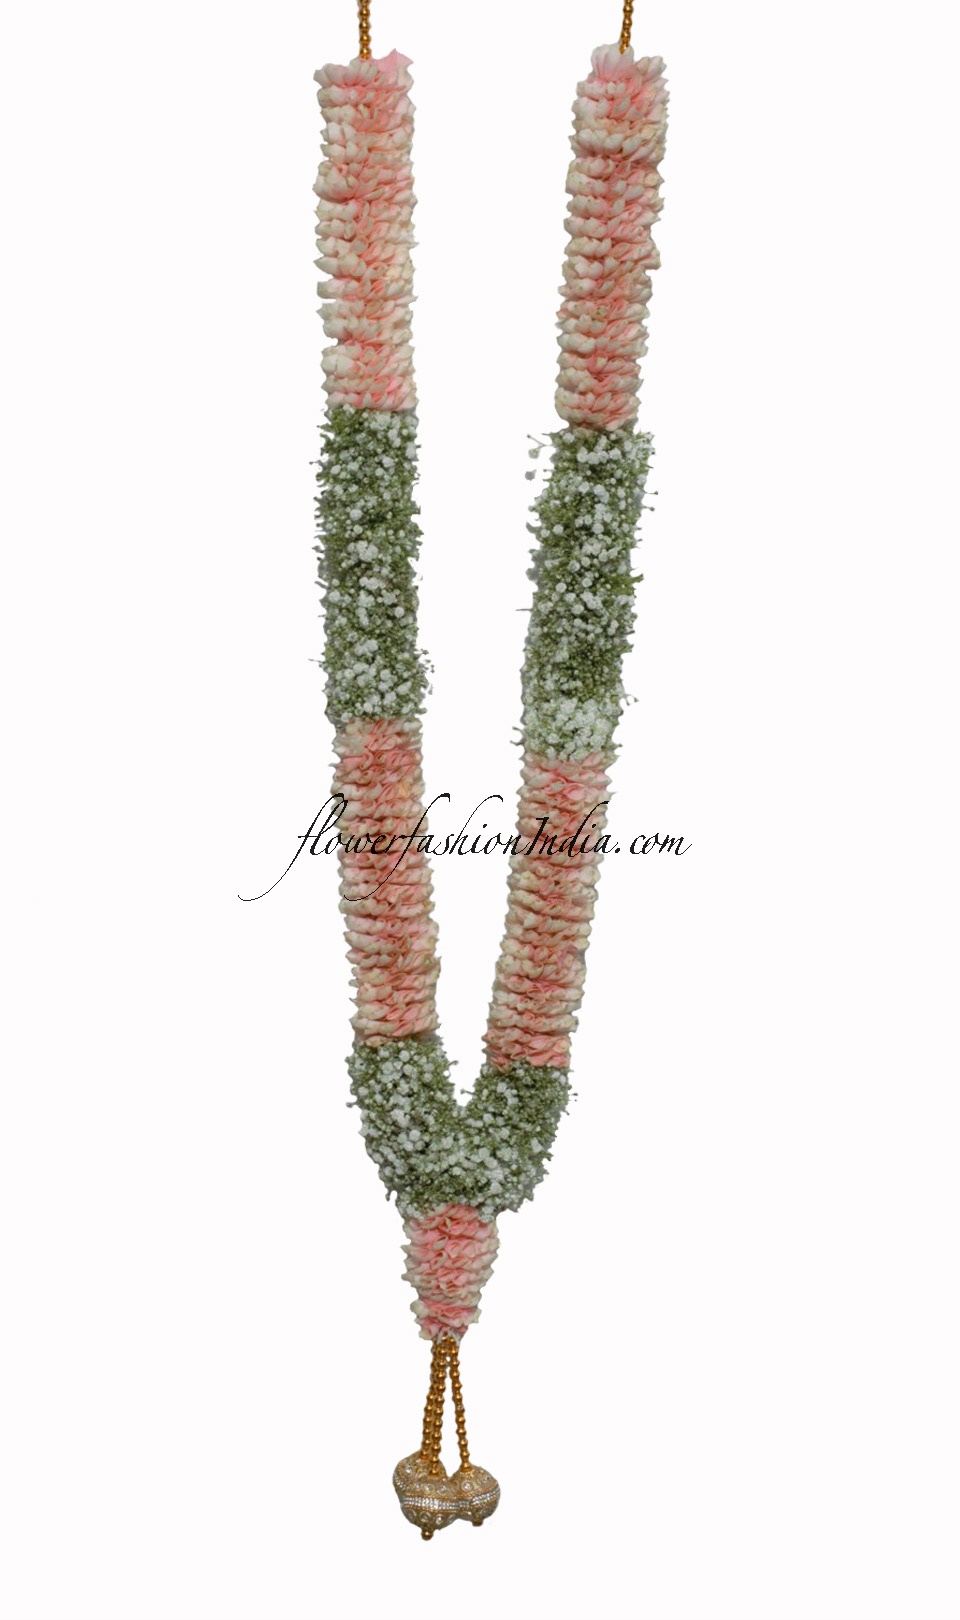 Shop Online For Pink Rose Petals Garland With Baby's Breath For Weddings (1  Pair)